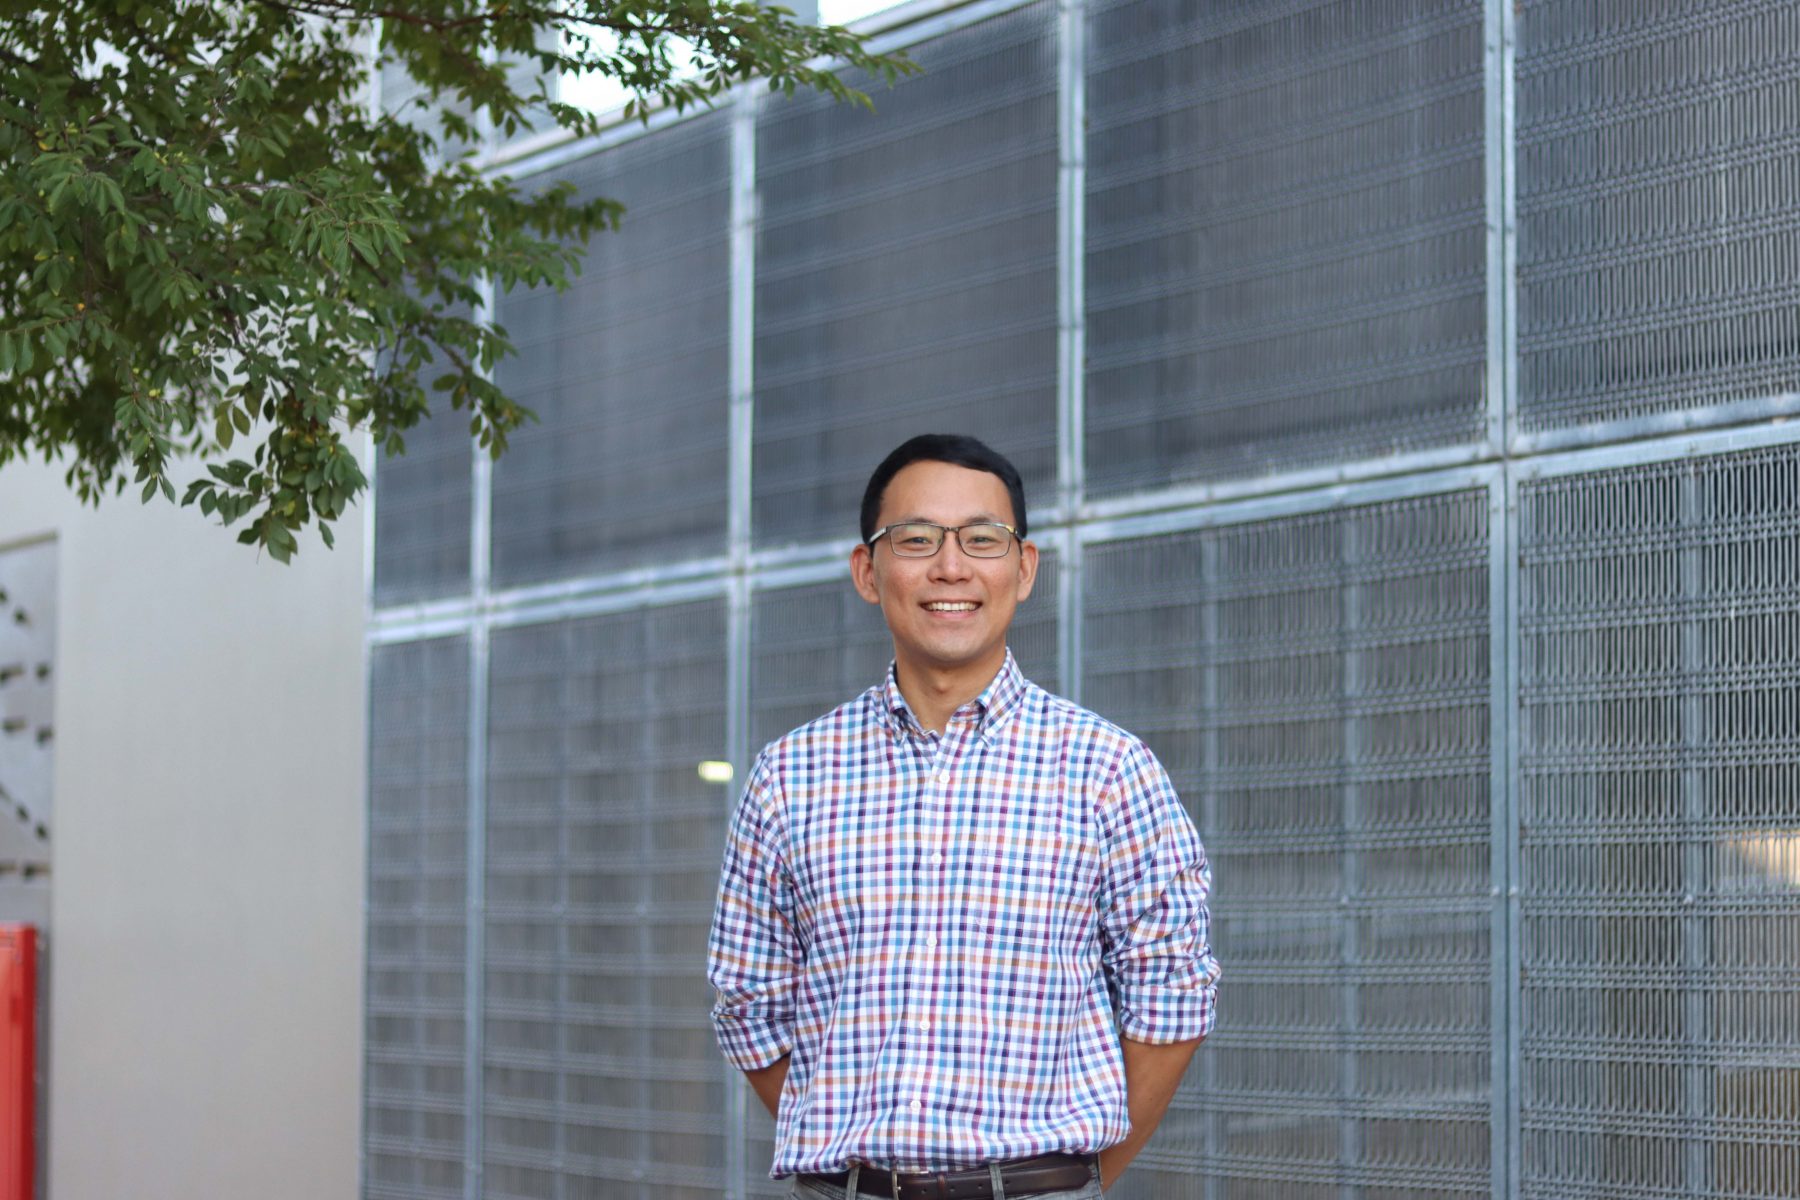 Photo of Chris Lin standing in front of a grated metal wall